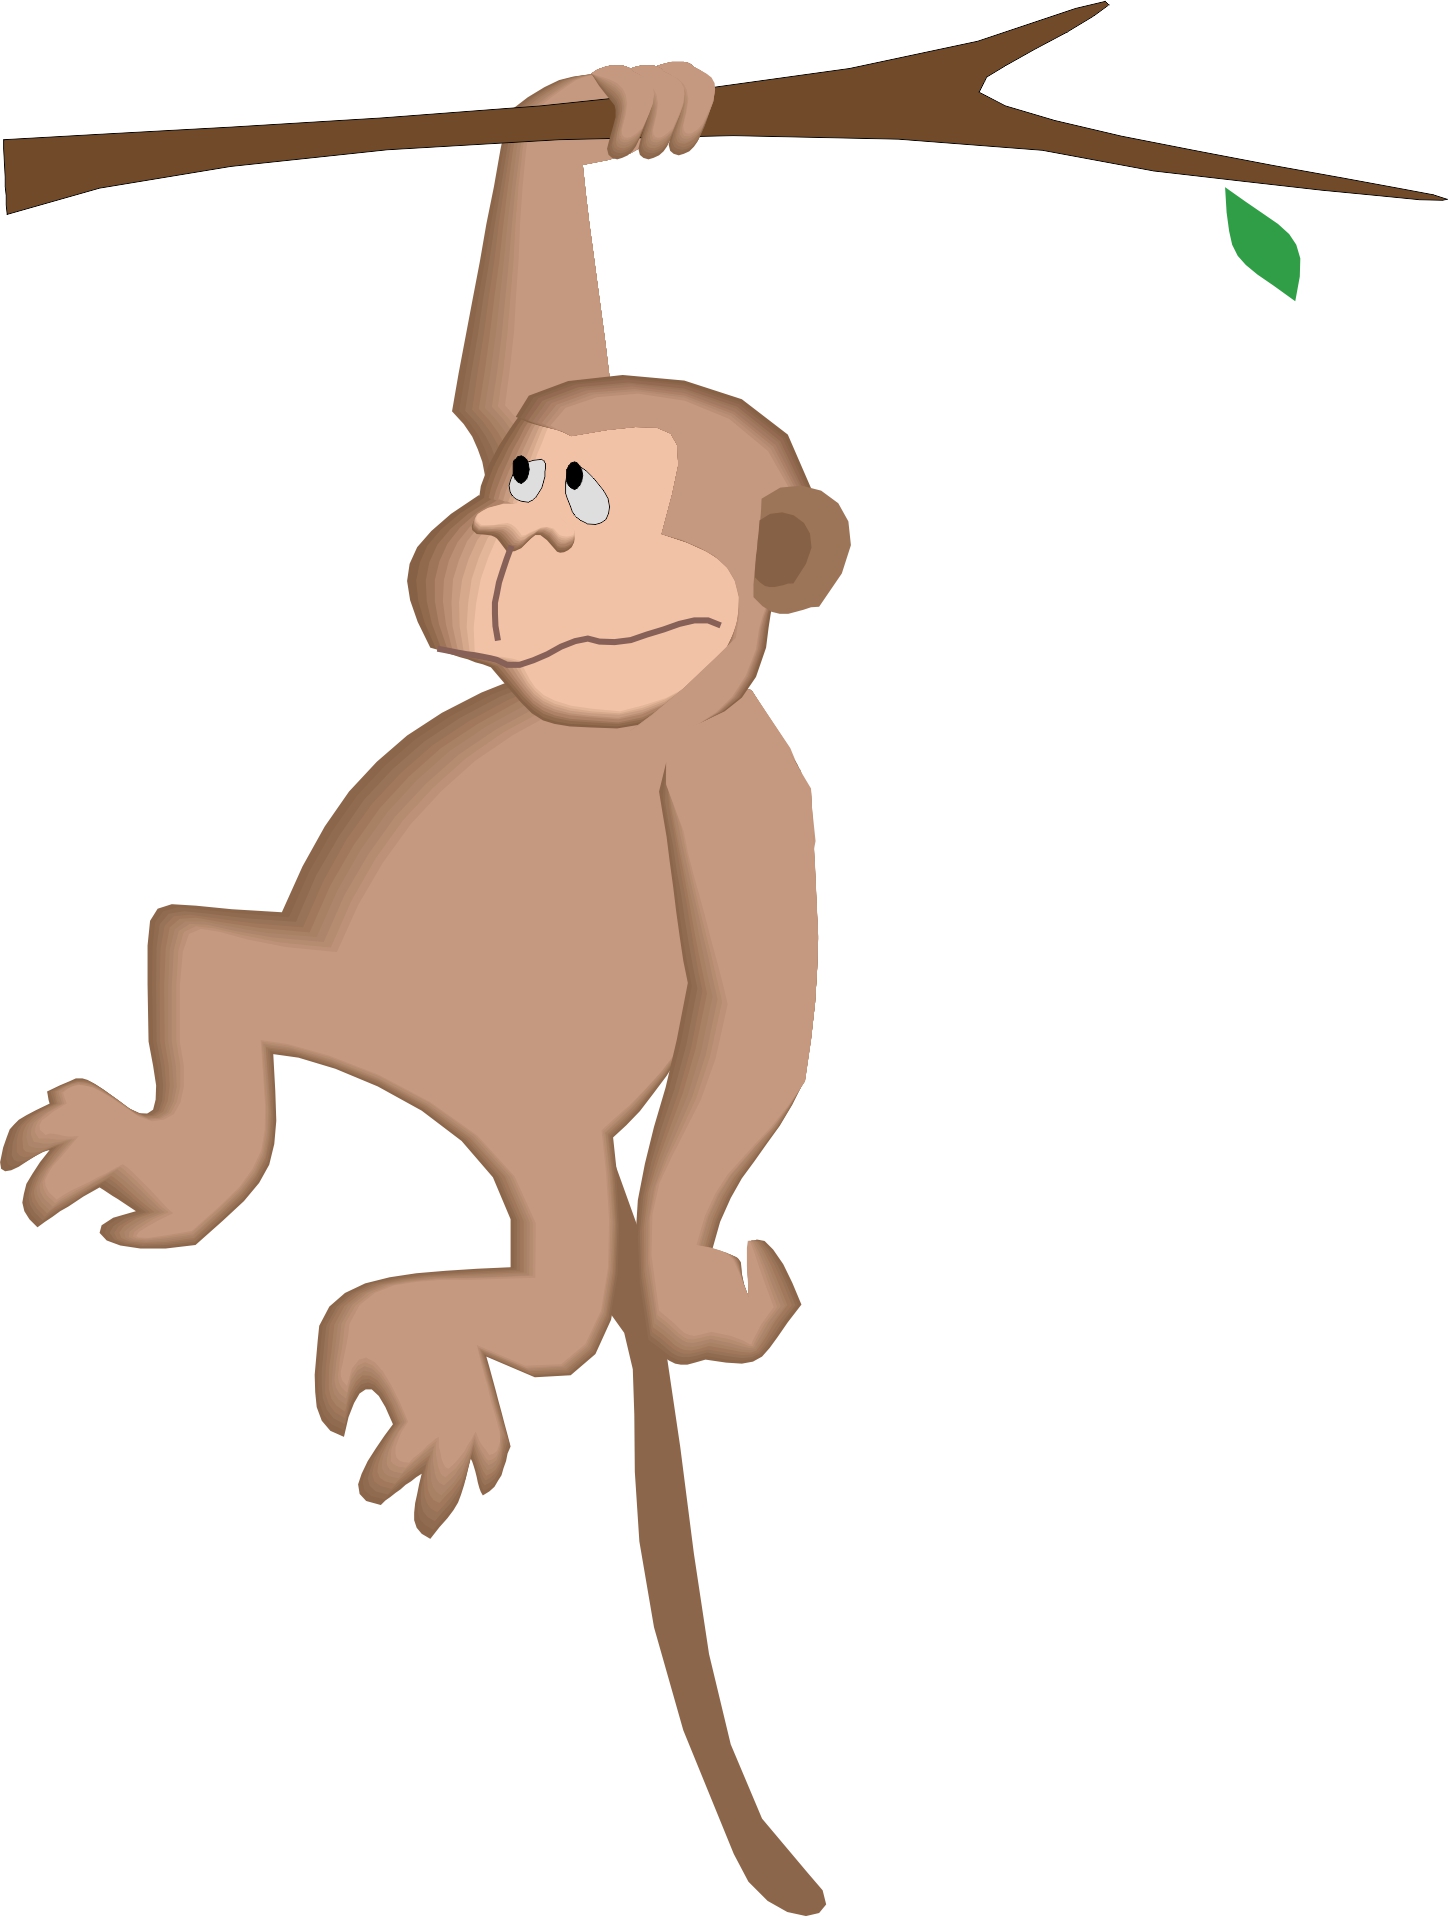 Pictures Of Monkeys Hanging From A Tree - Cliparts.co